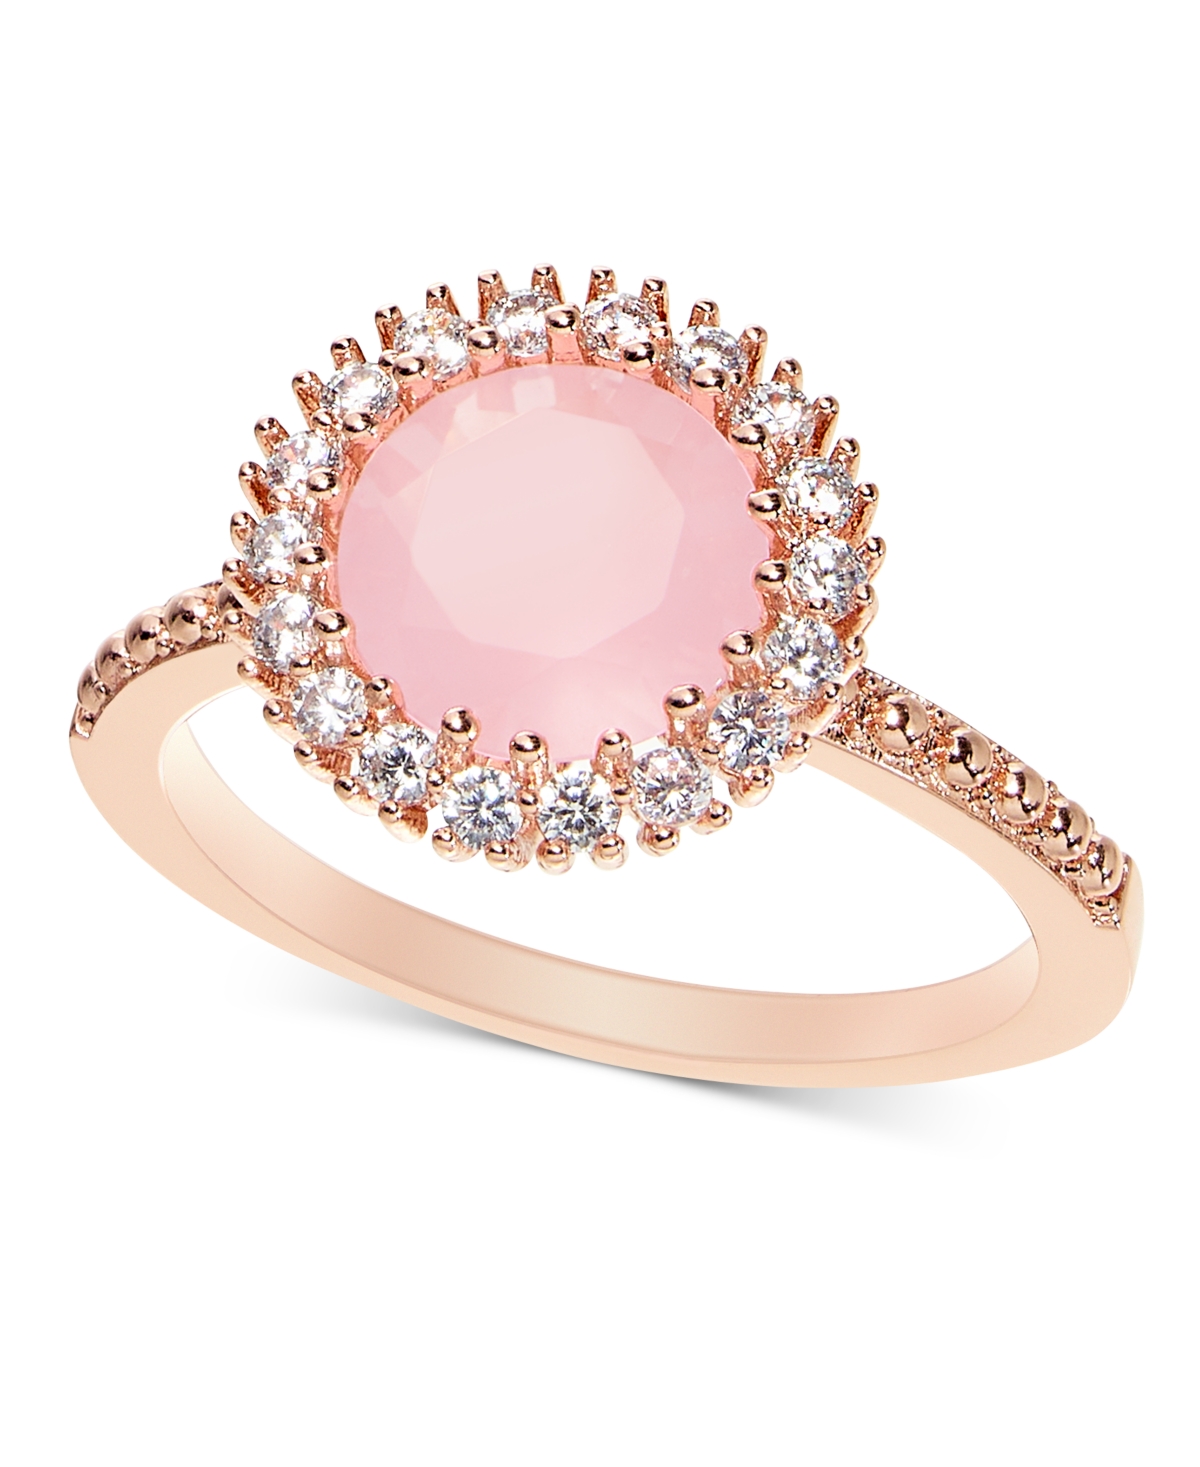 Rose Gold-Tone Pave & Color Crystal Halo Ring, Created for Macy's - Rose Gold